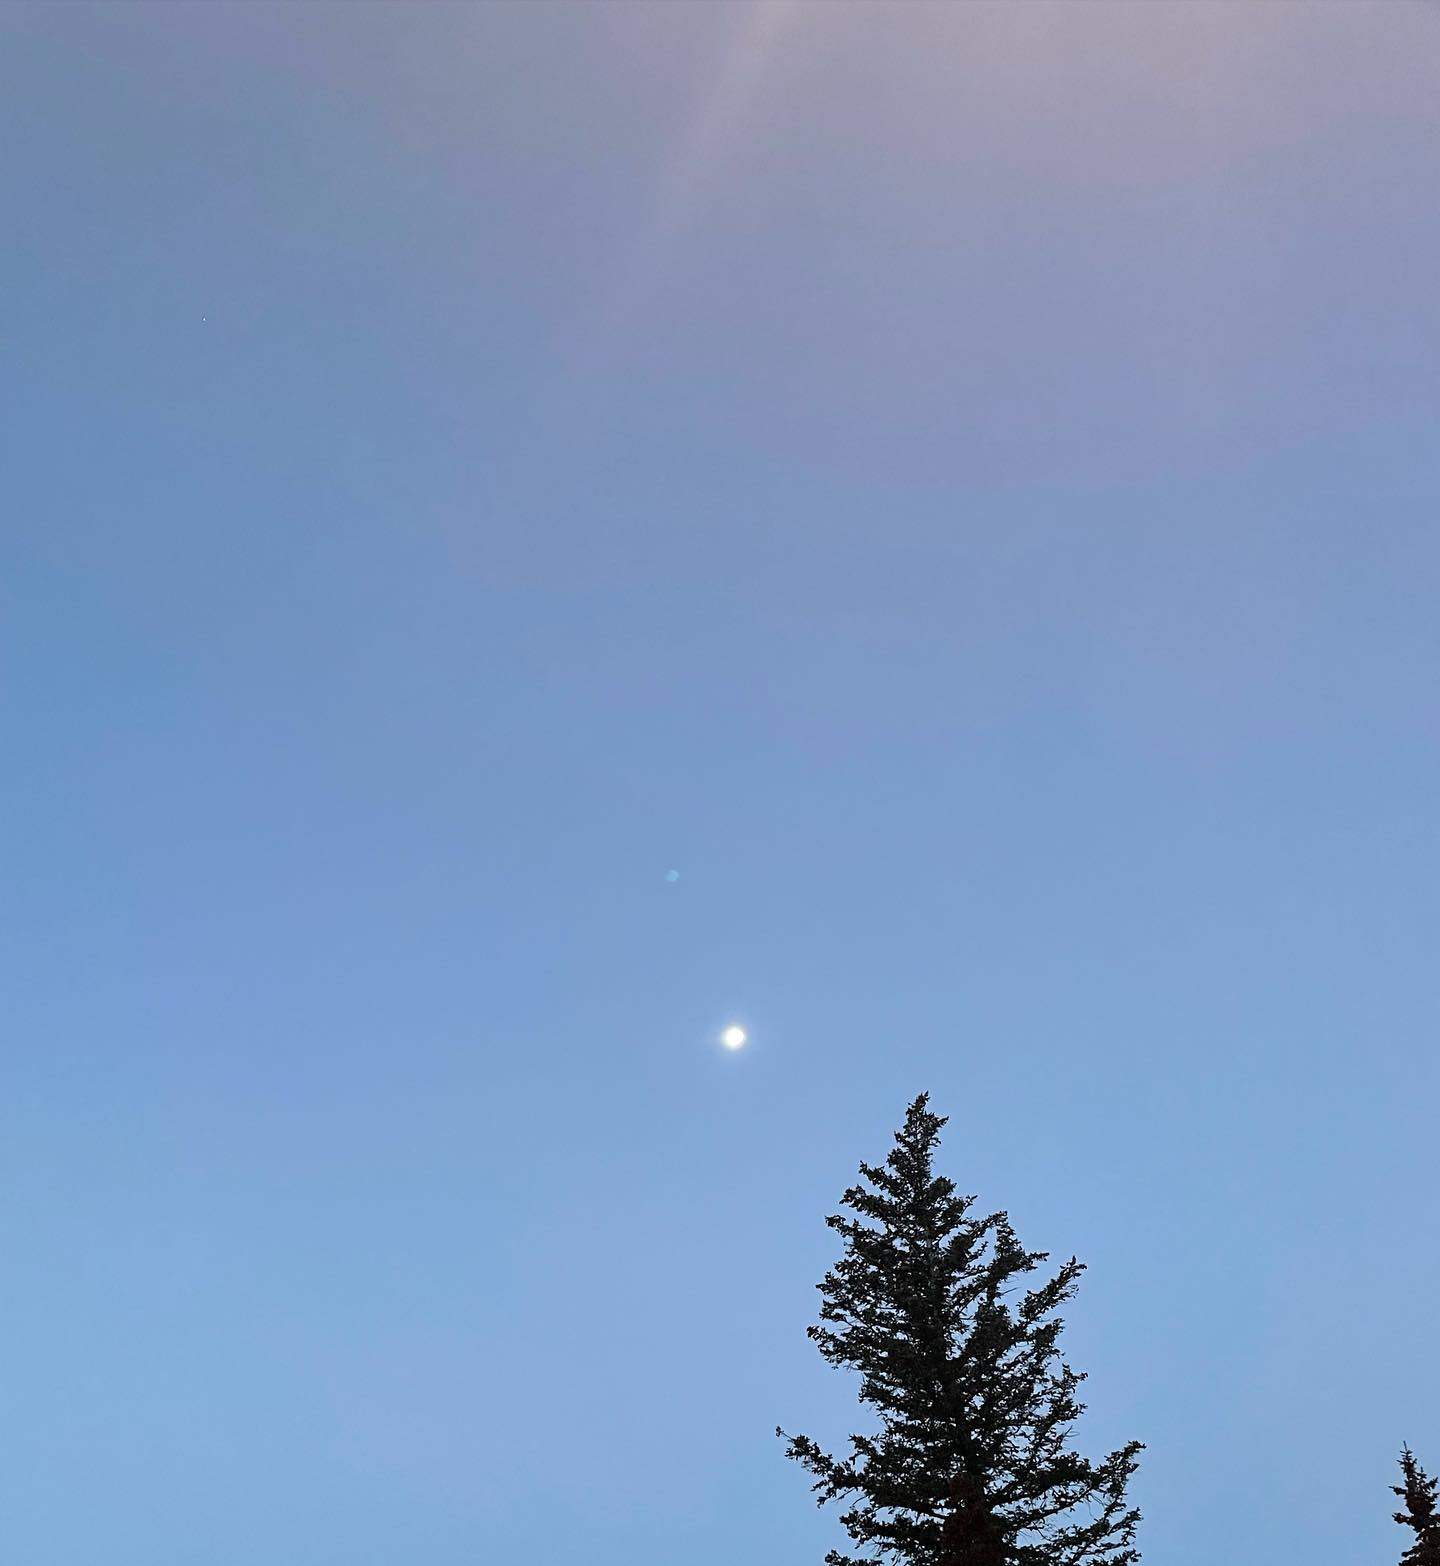 A photo of the early morning sky. The hues are purplish blue. There is a bright sun spot in the lower half. The very tops of two coniferous trees are creeping into the frame from the bottom of the photograph.